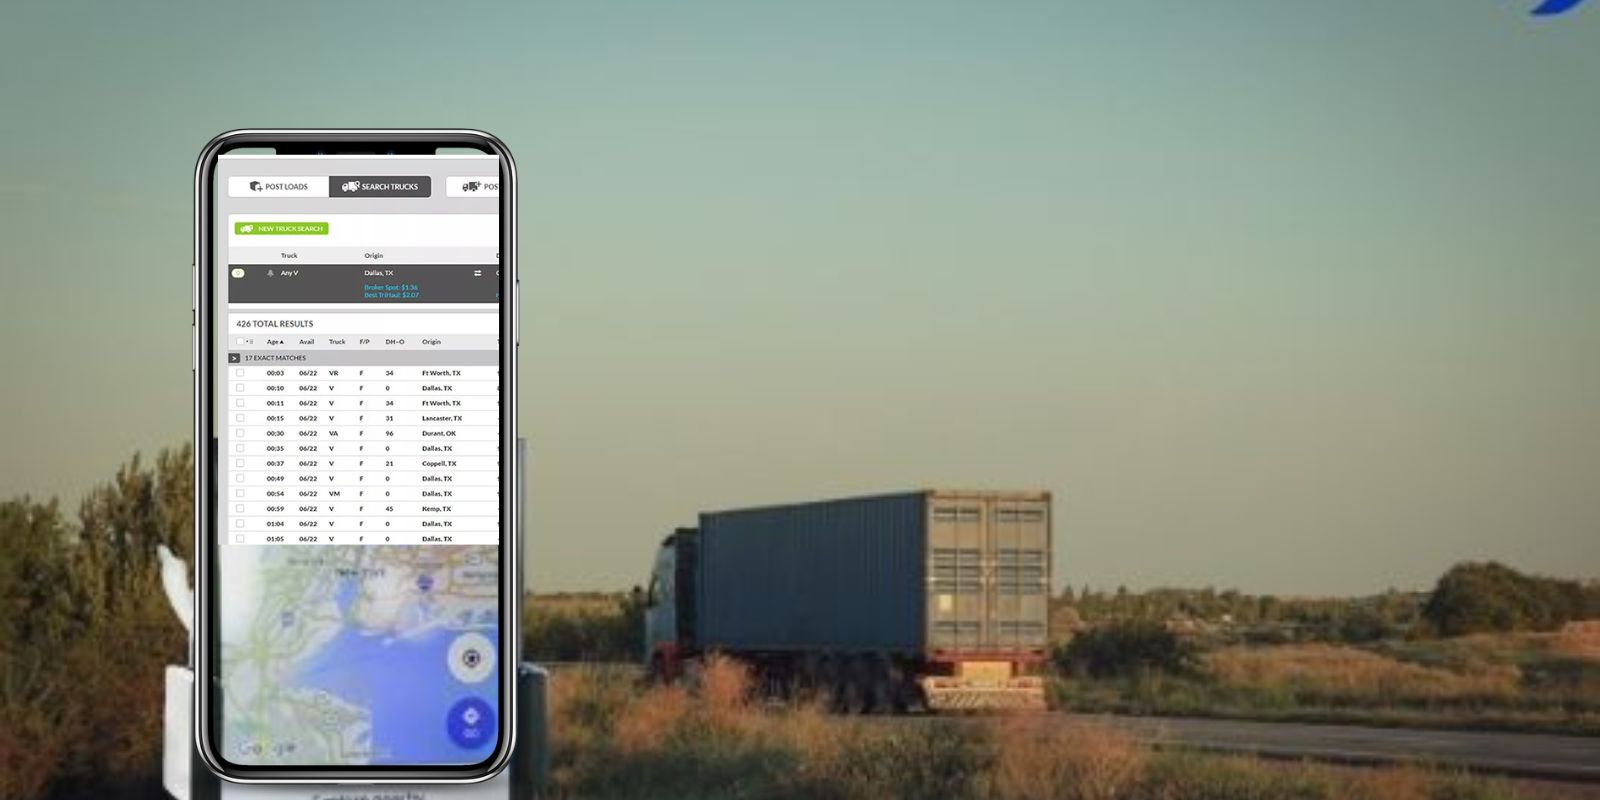 A mobile screen show load board for truckers